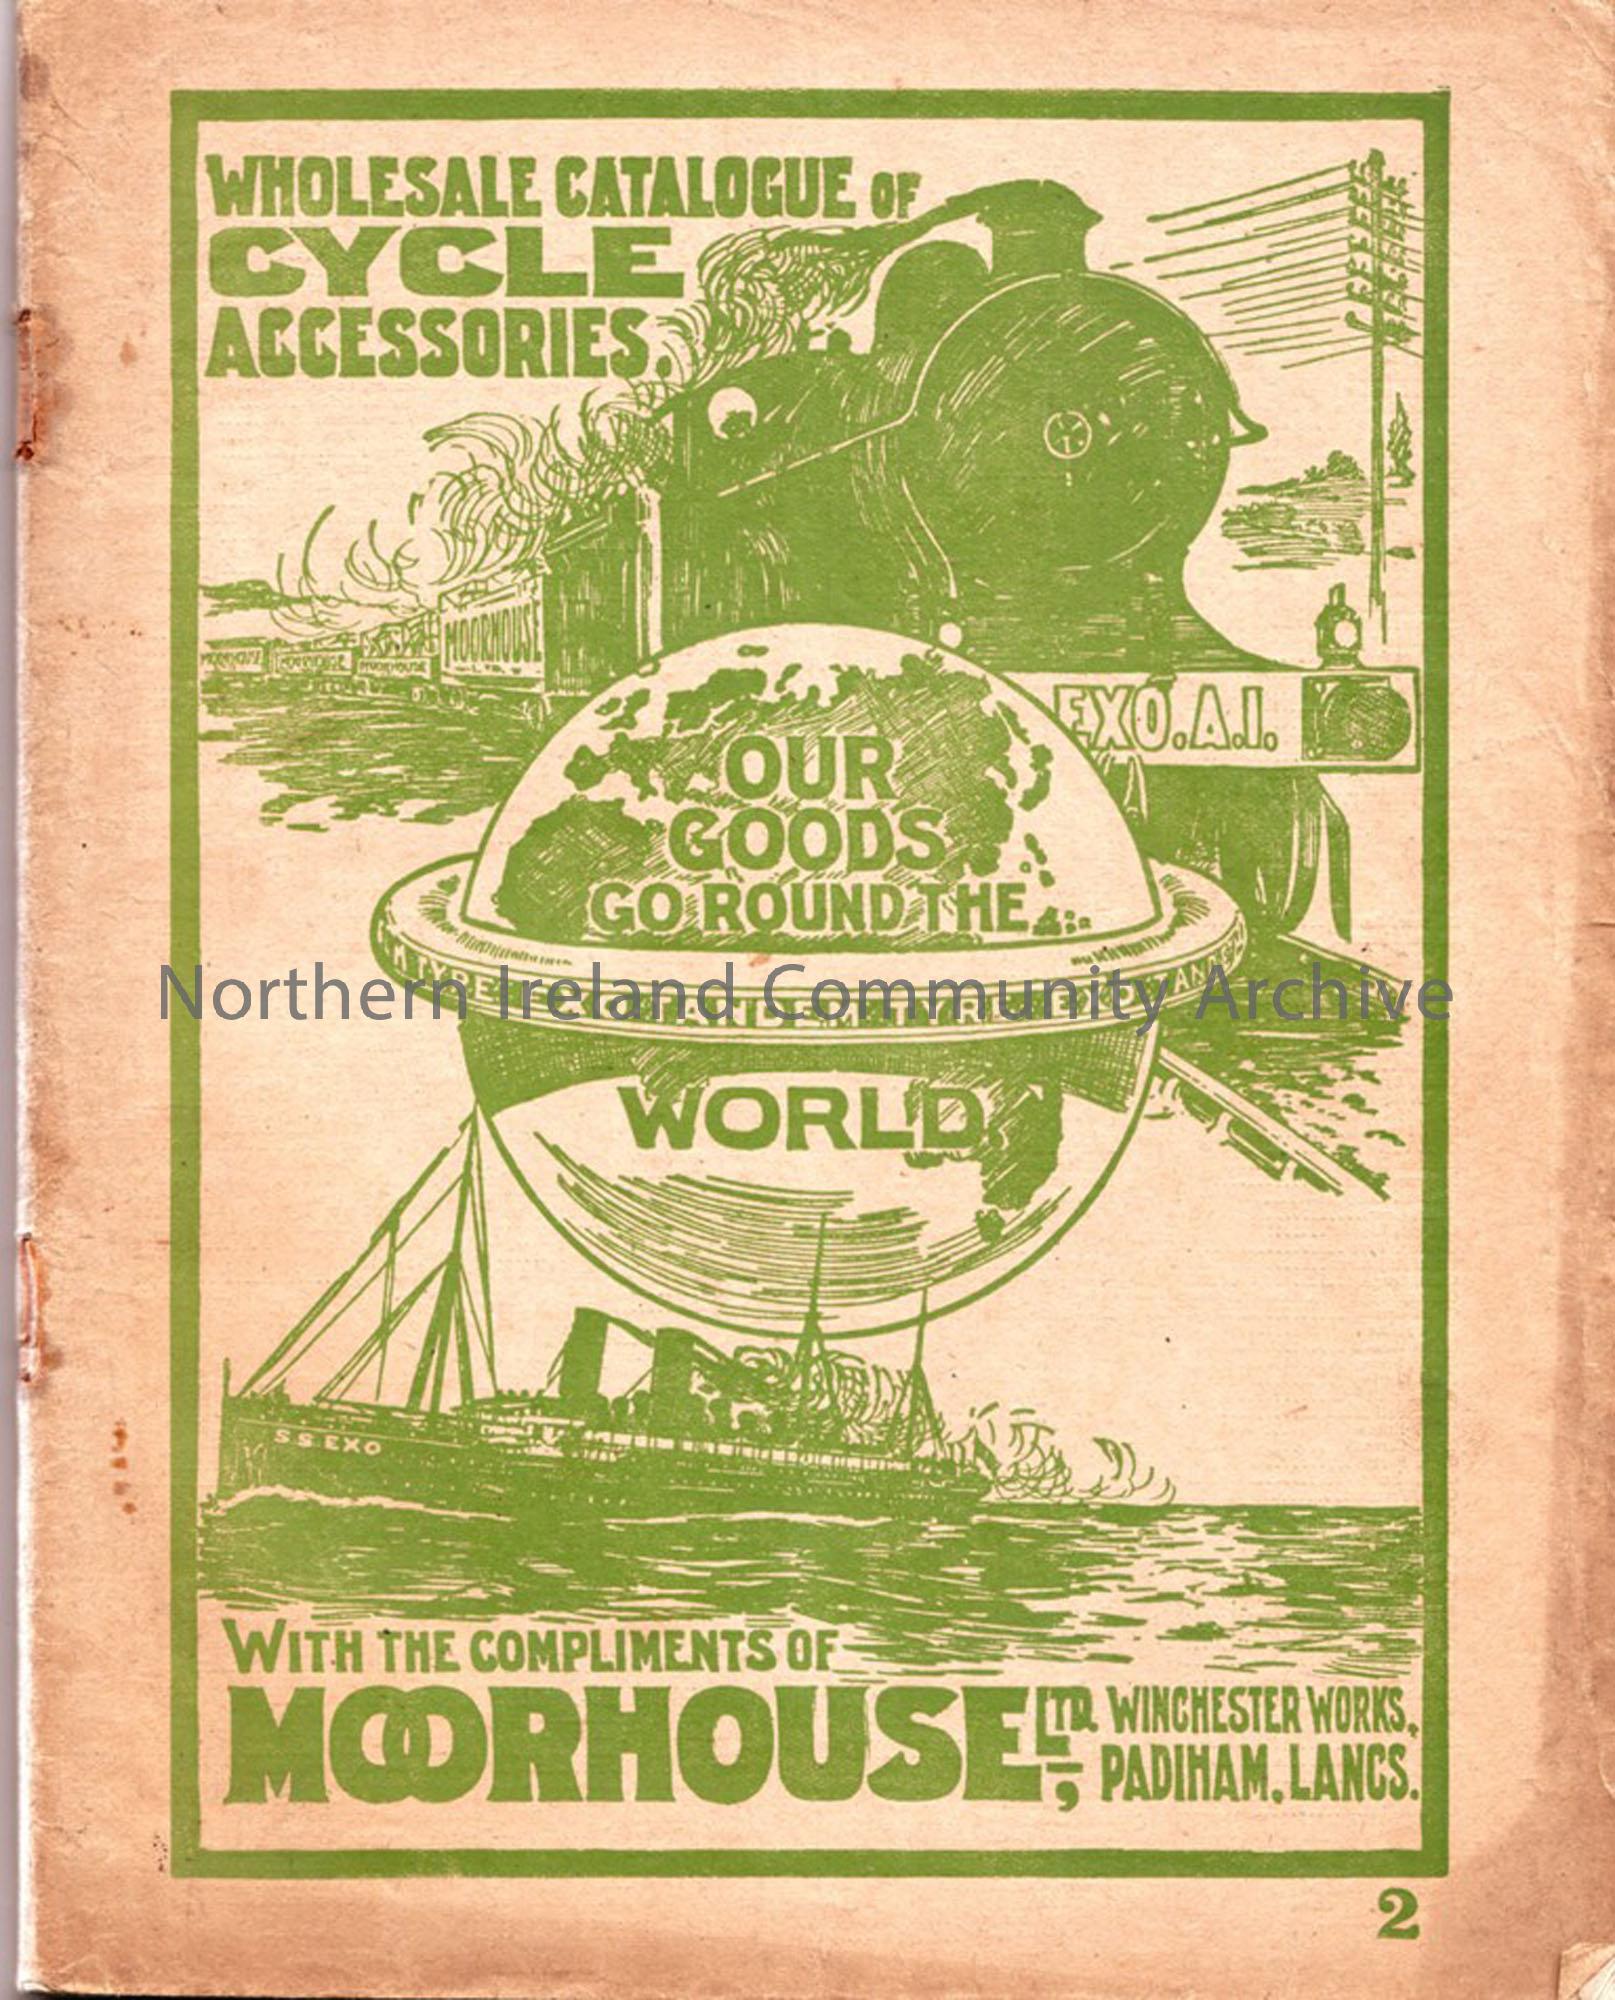 Wholesale catalogue of cycle accessories. ‘Our goods go round the world.’ Moorhouse Ltd, Winchester Works, Padiham, Lancs. August 27th 1919.